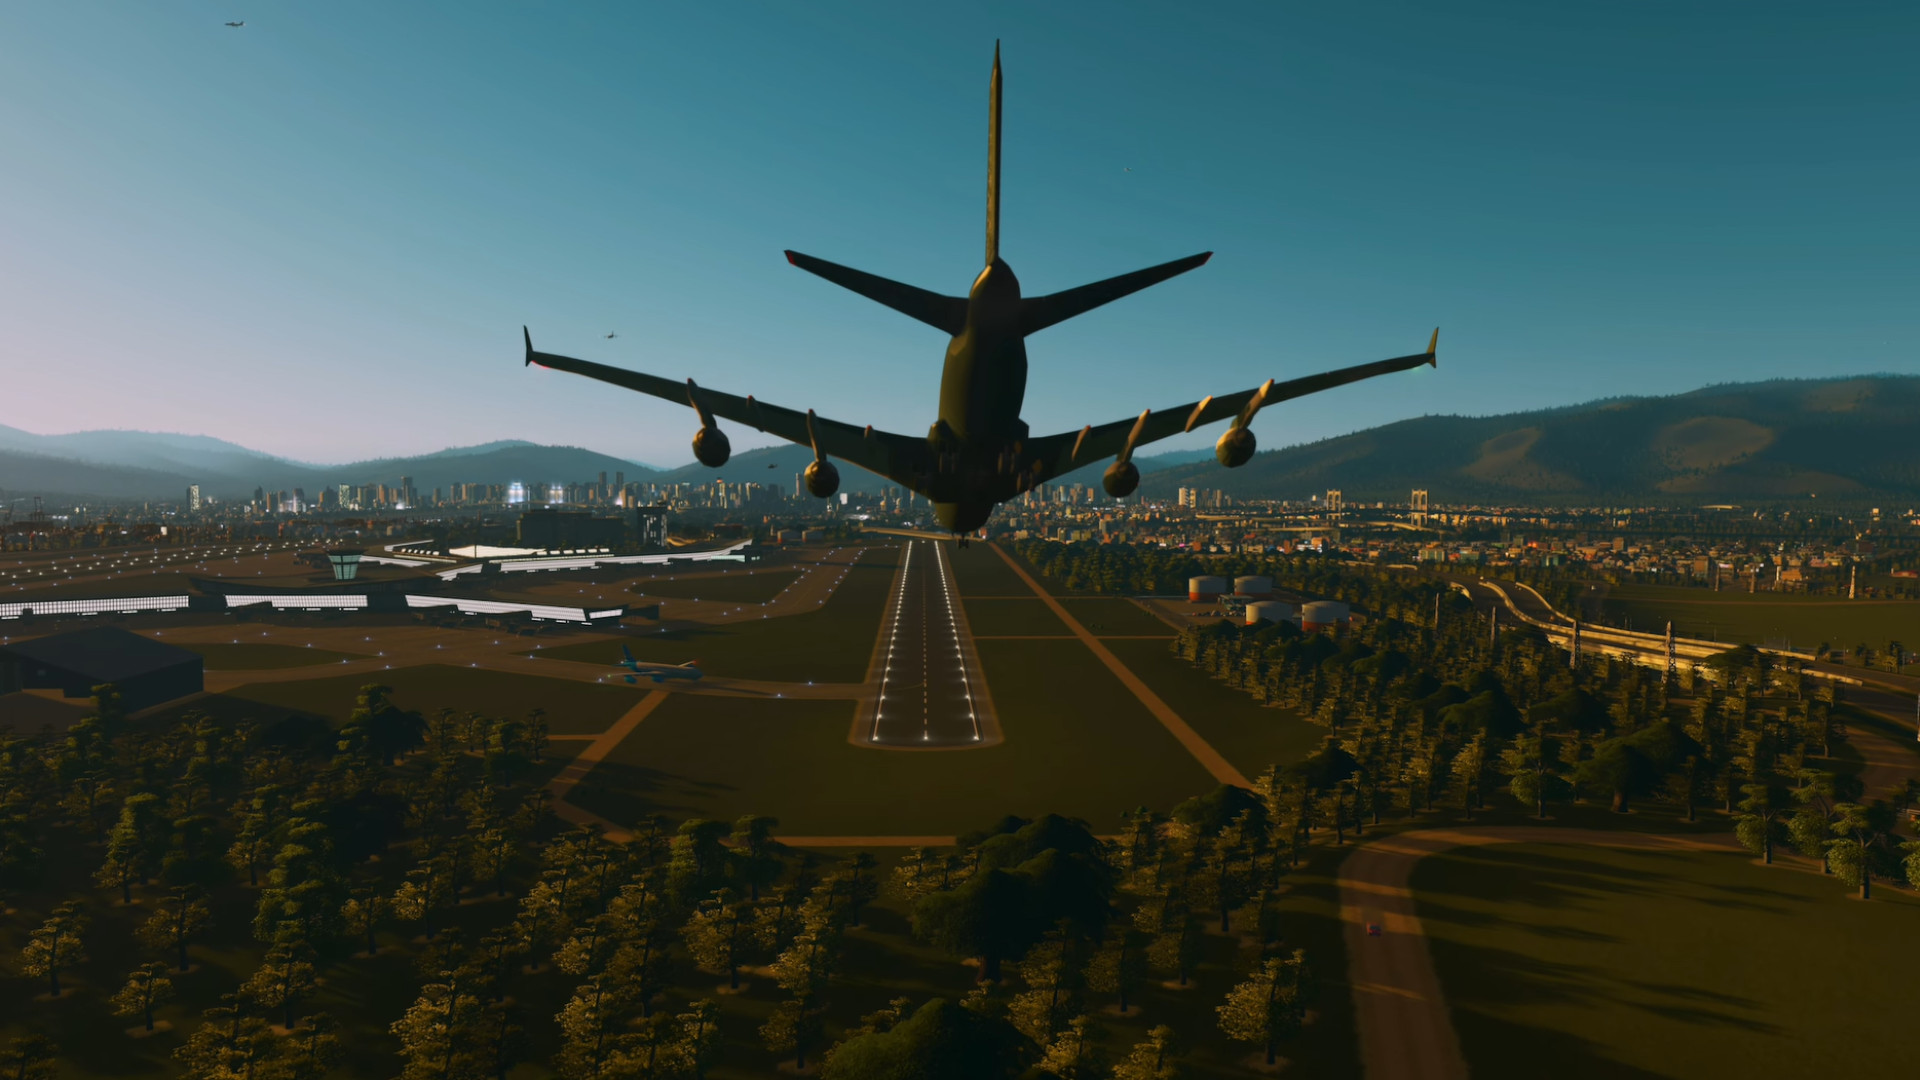 Cities: Skylines’ Airports DLC brings air travel to the city-building game